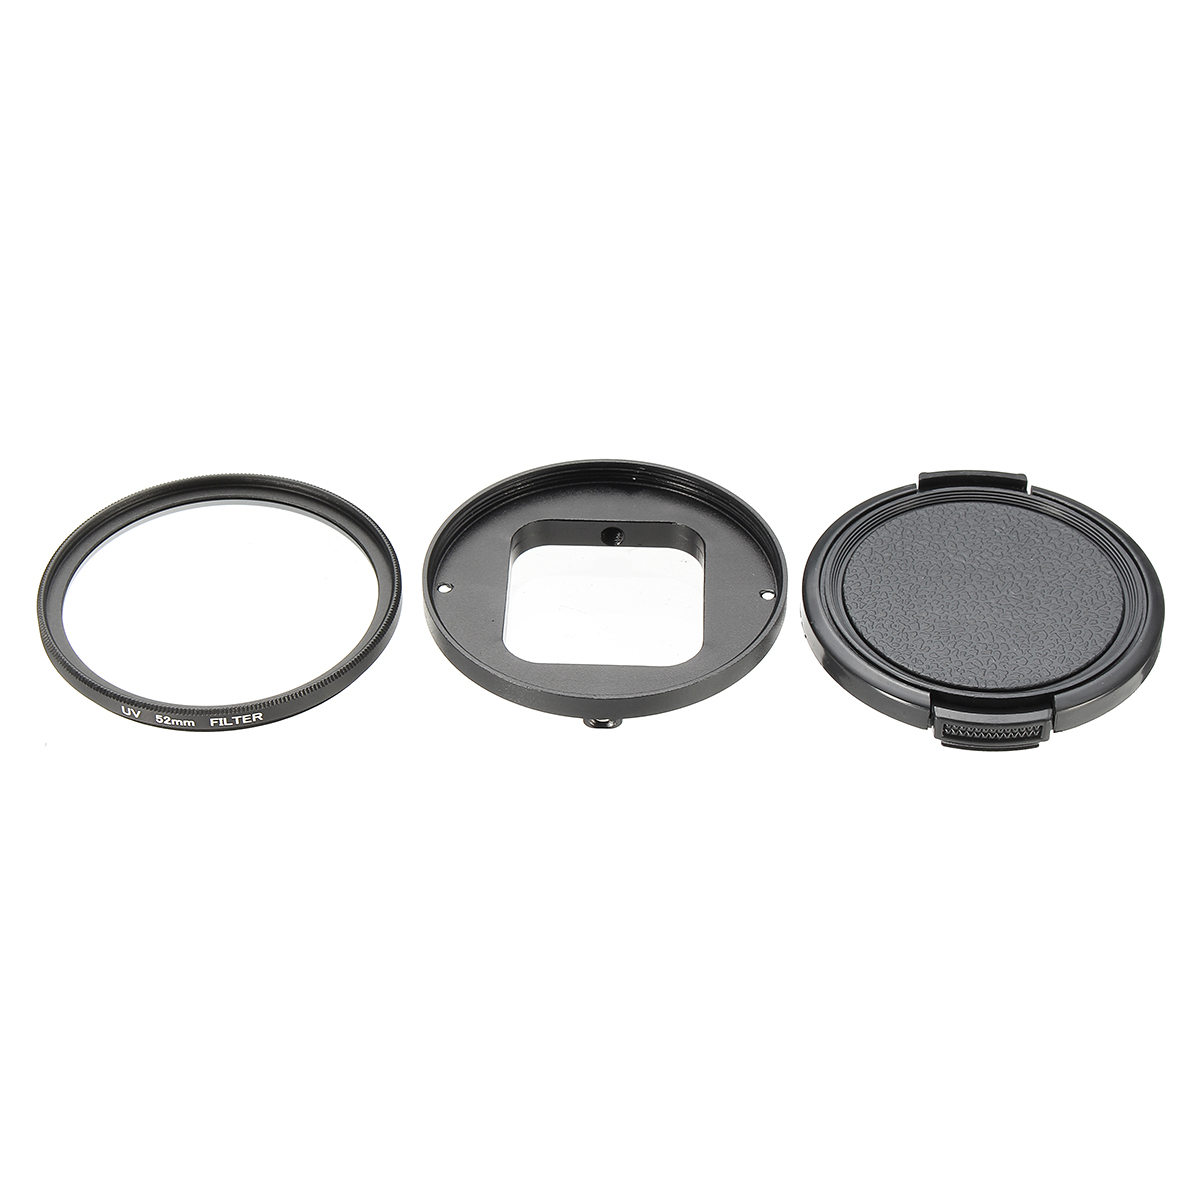 

3 in 1 52mm UV Filter Lens Cap Cover with Adapter Ring Wrench For Gopro Hero 7 6 5 Black